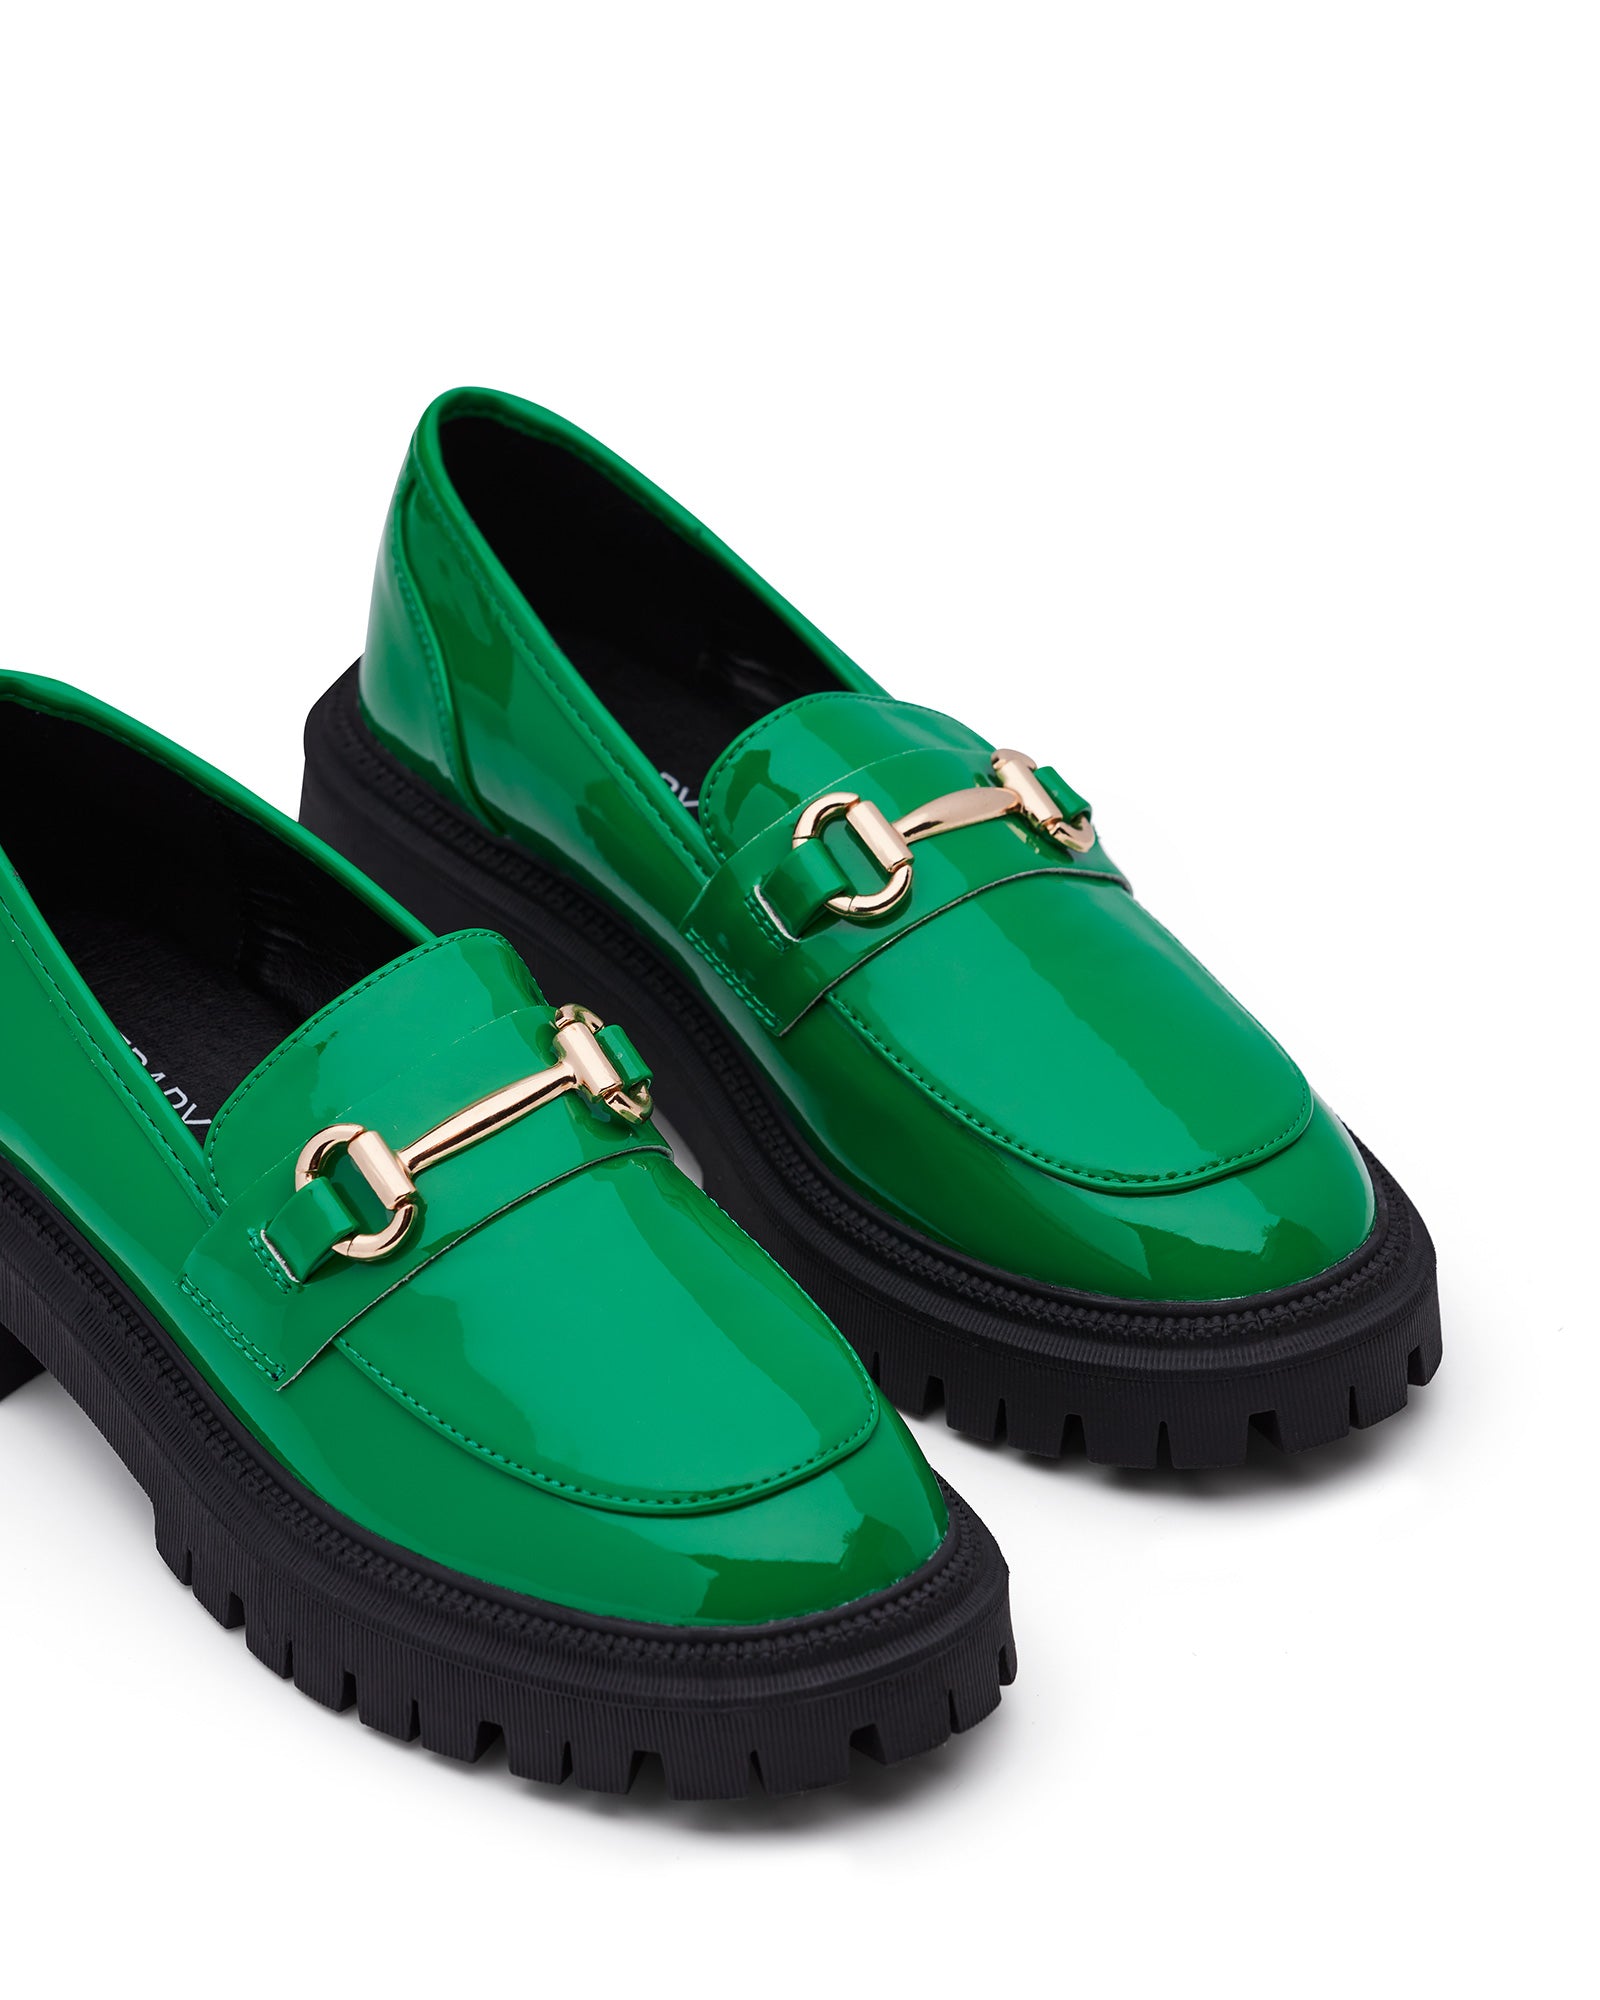 Extra Loafer Fern Patent